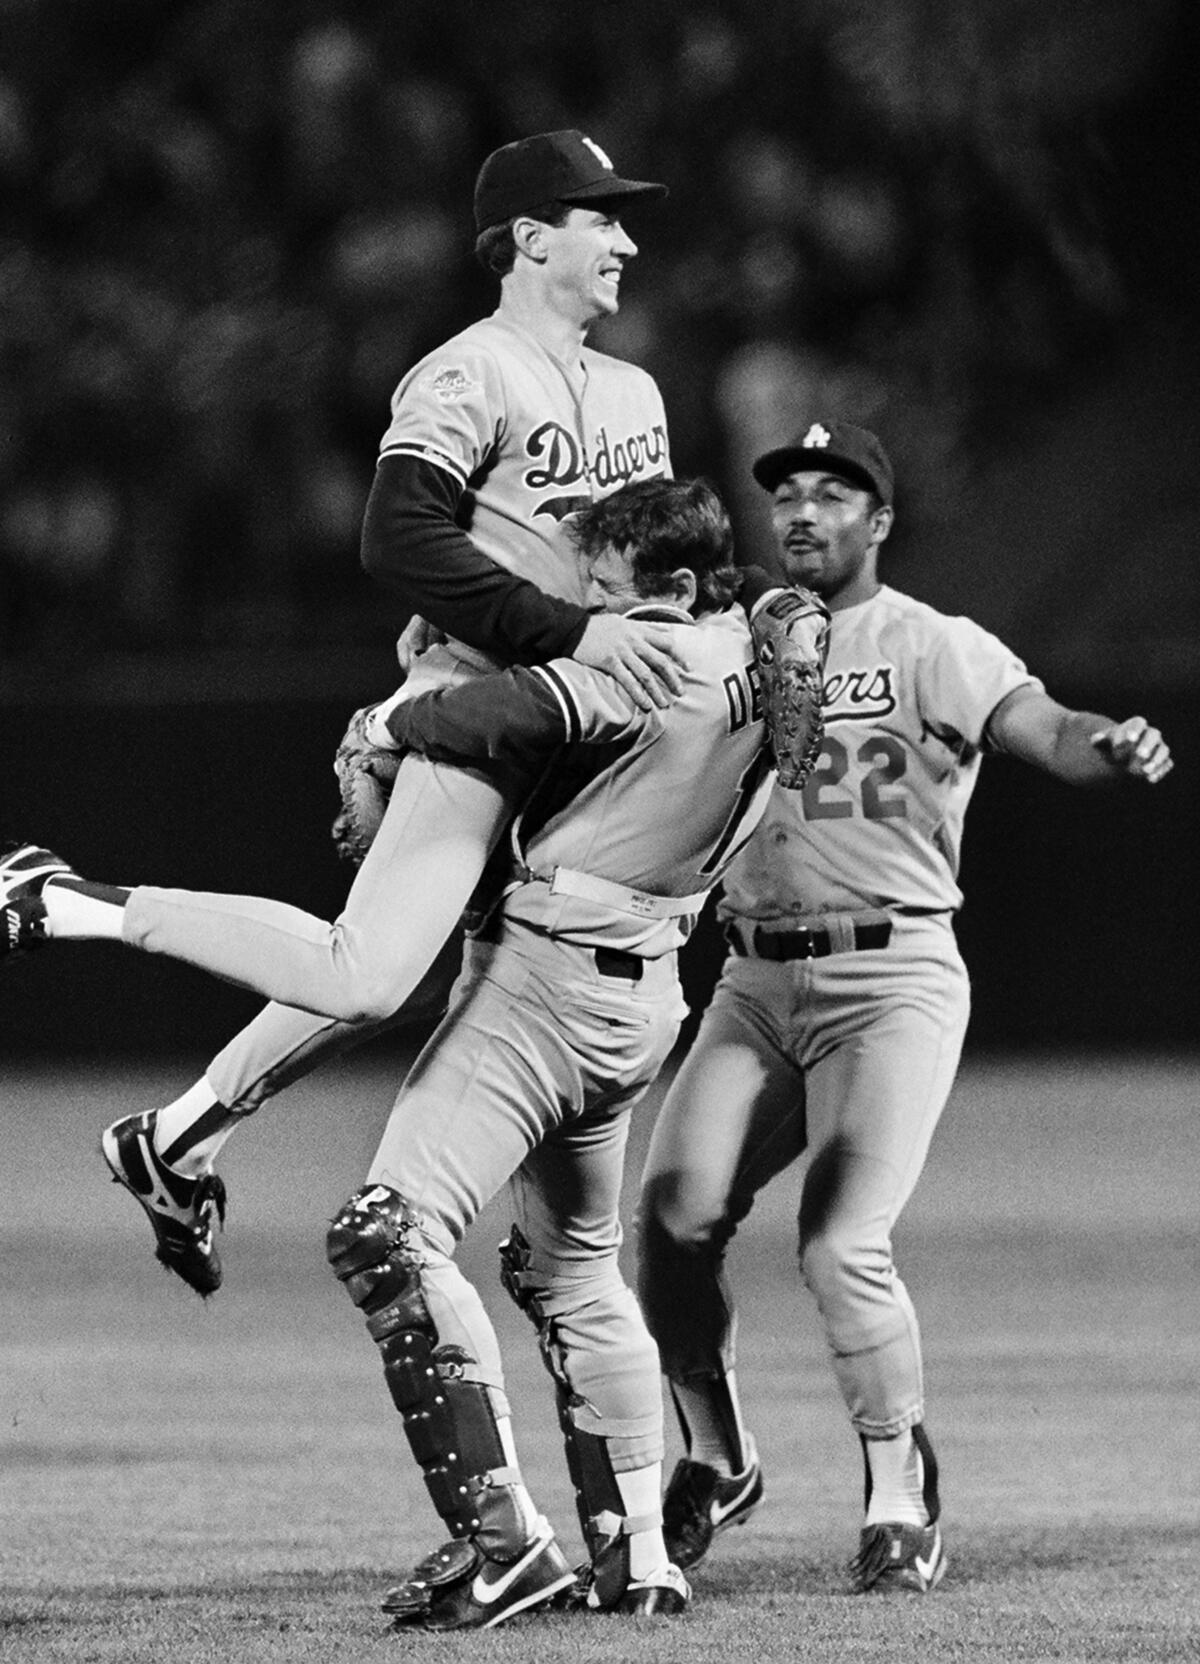 Rick Dempsey lifts Orel Hershiser, as Franklin Stubbs looks on at right, after the Dodgers beat the Oakland Athletics in Game 5 to win the 1988 World Series.